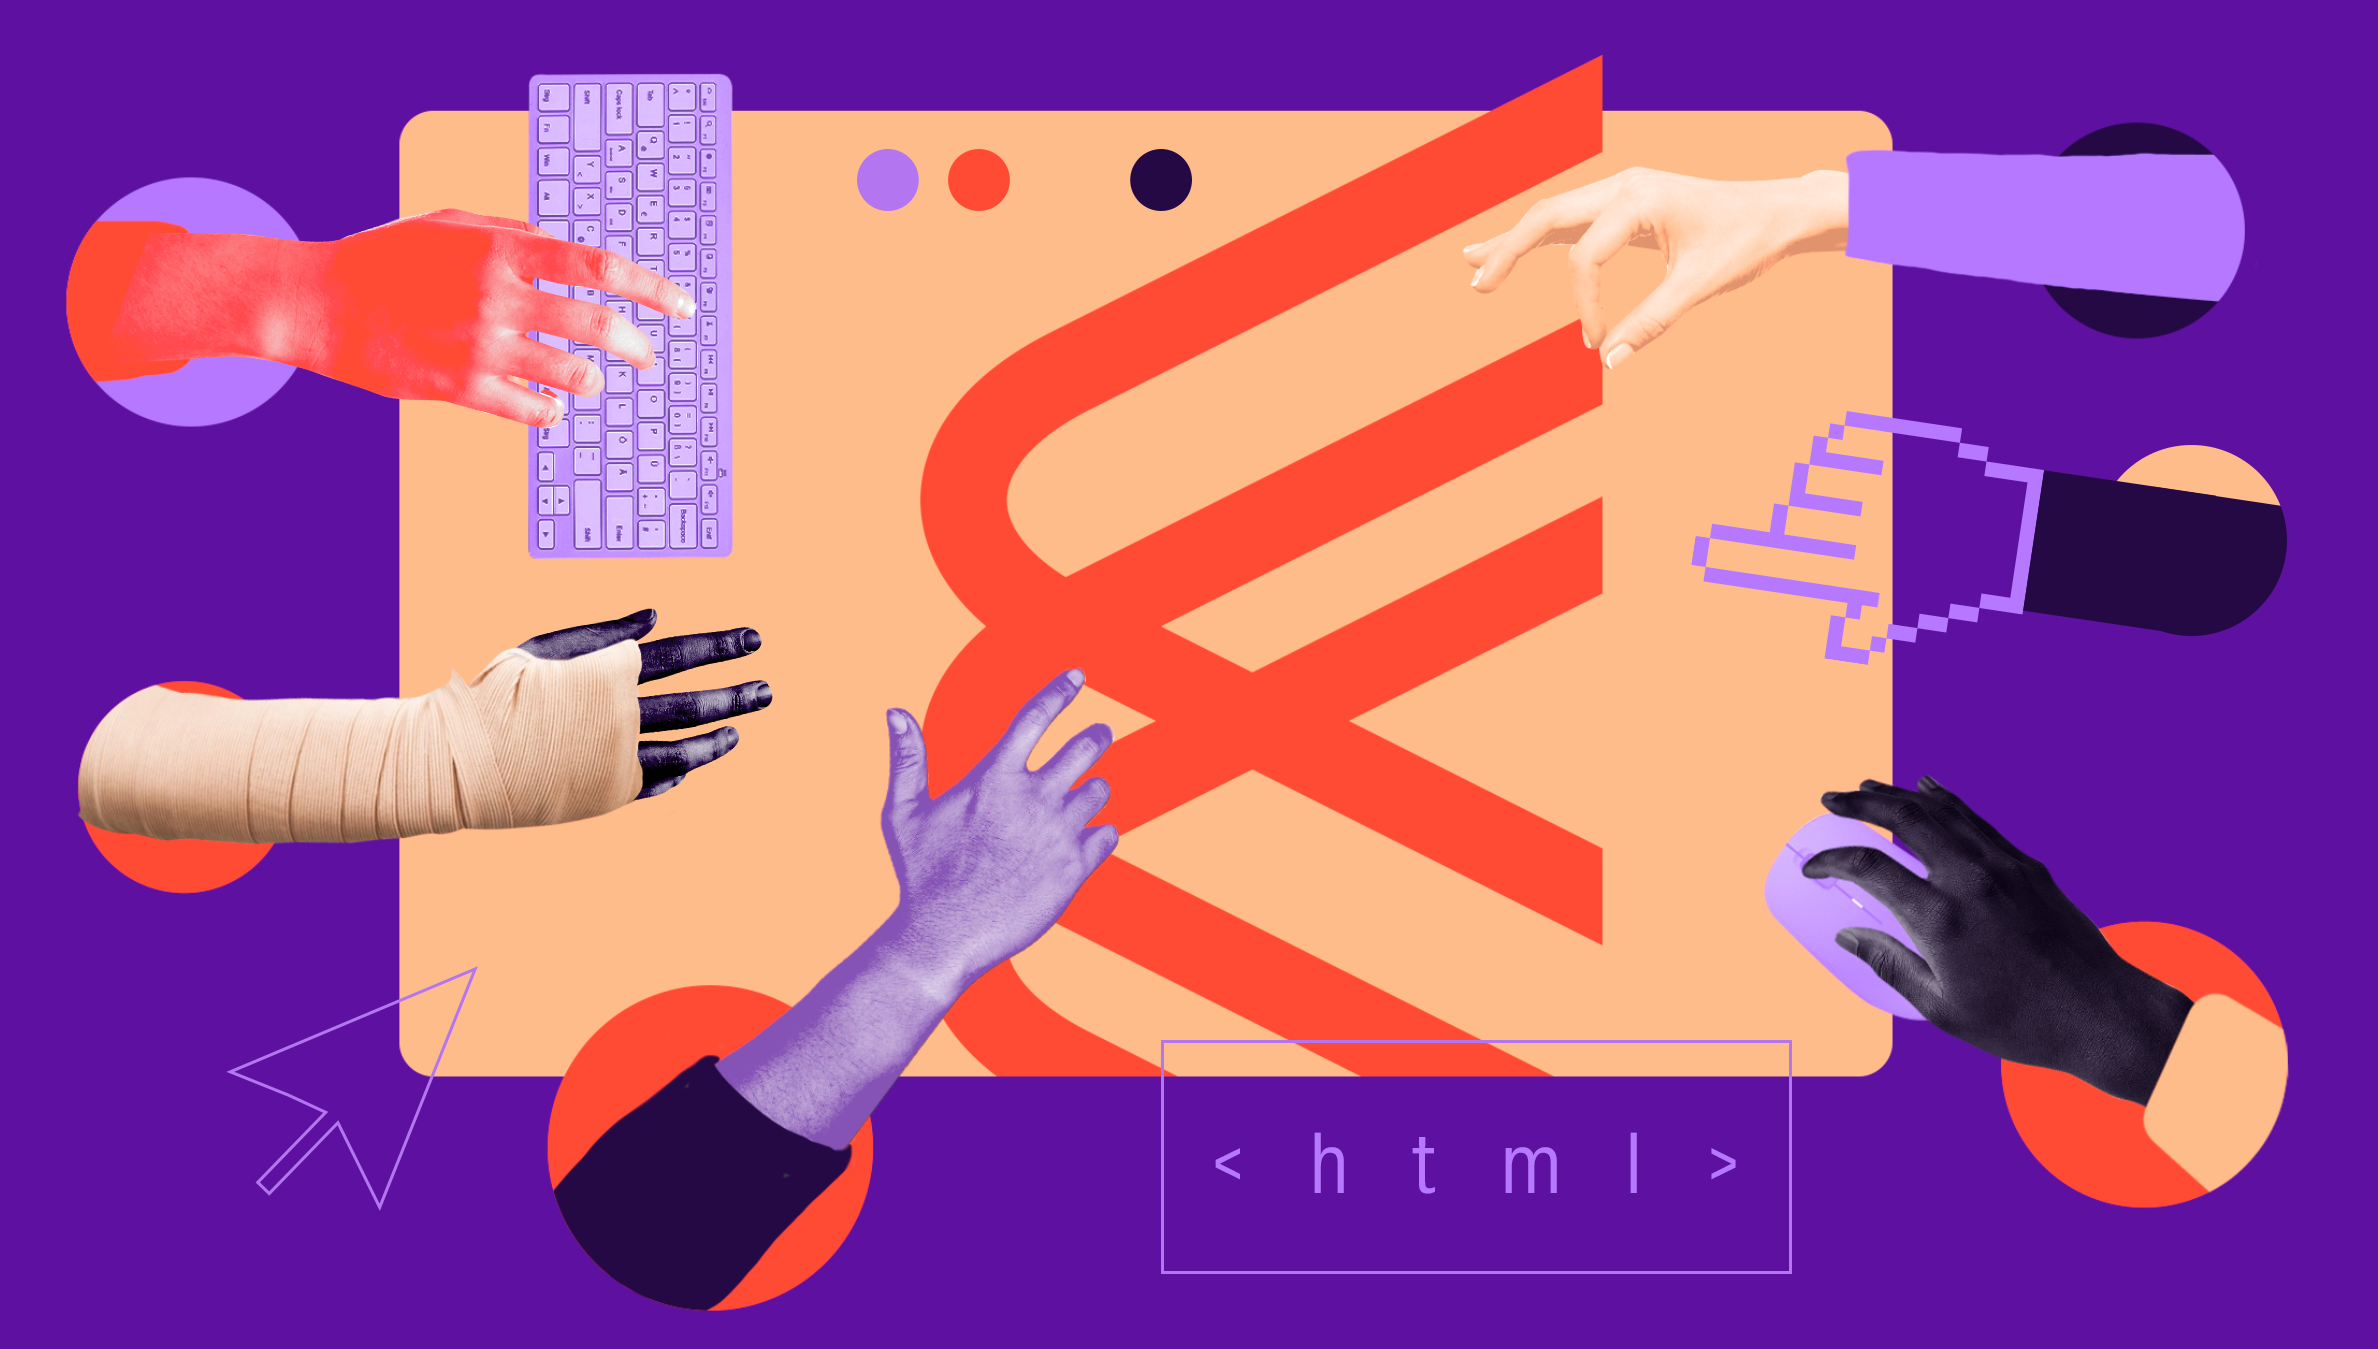 Abstract illustration of multi-colored human arms and hands reaching for and touching the Chorus logo (another arm is bandaged, one hand is a digital hand) while another hand holds a mouse, and another touches a keyboard.